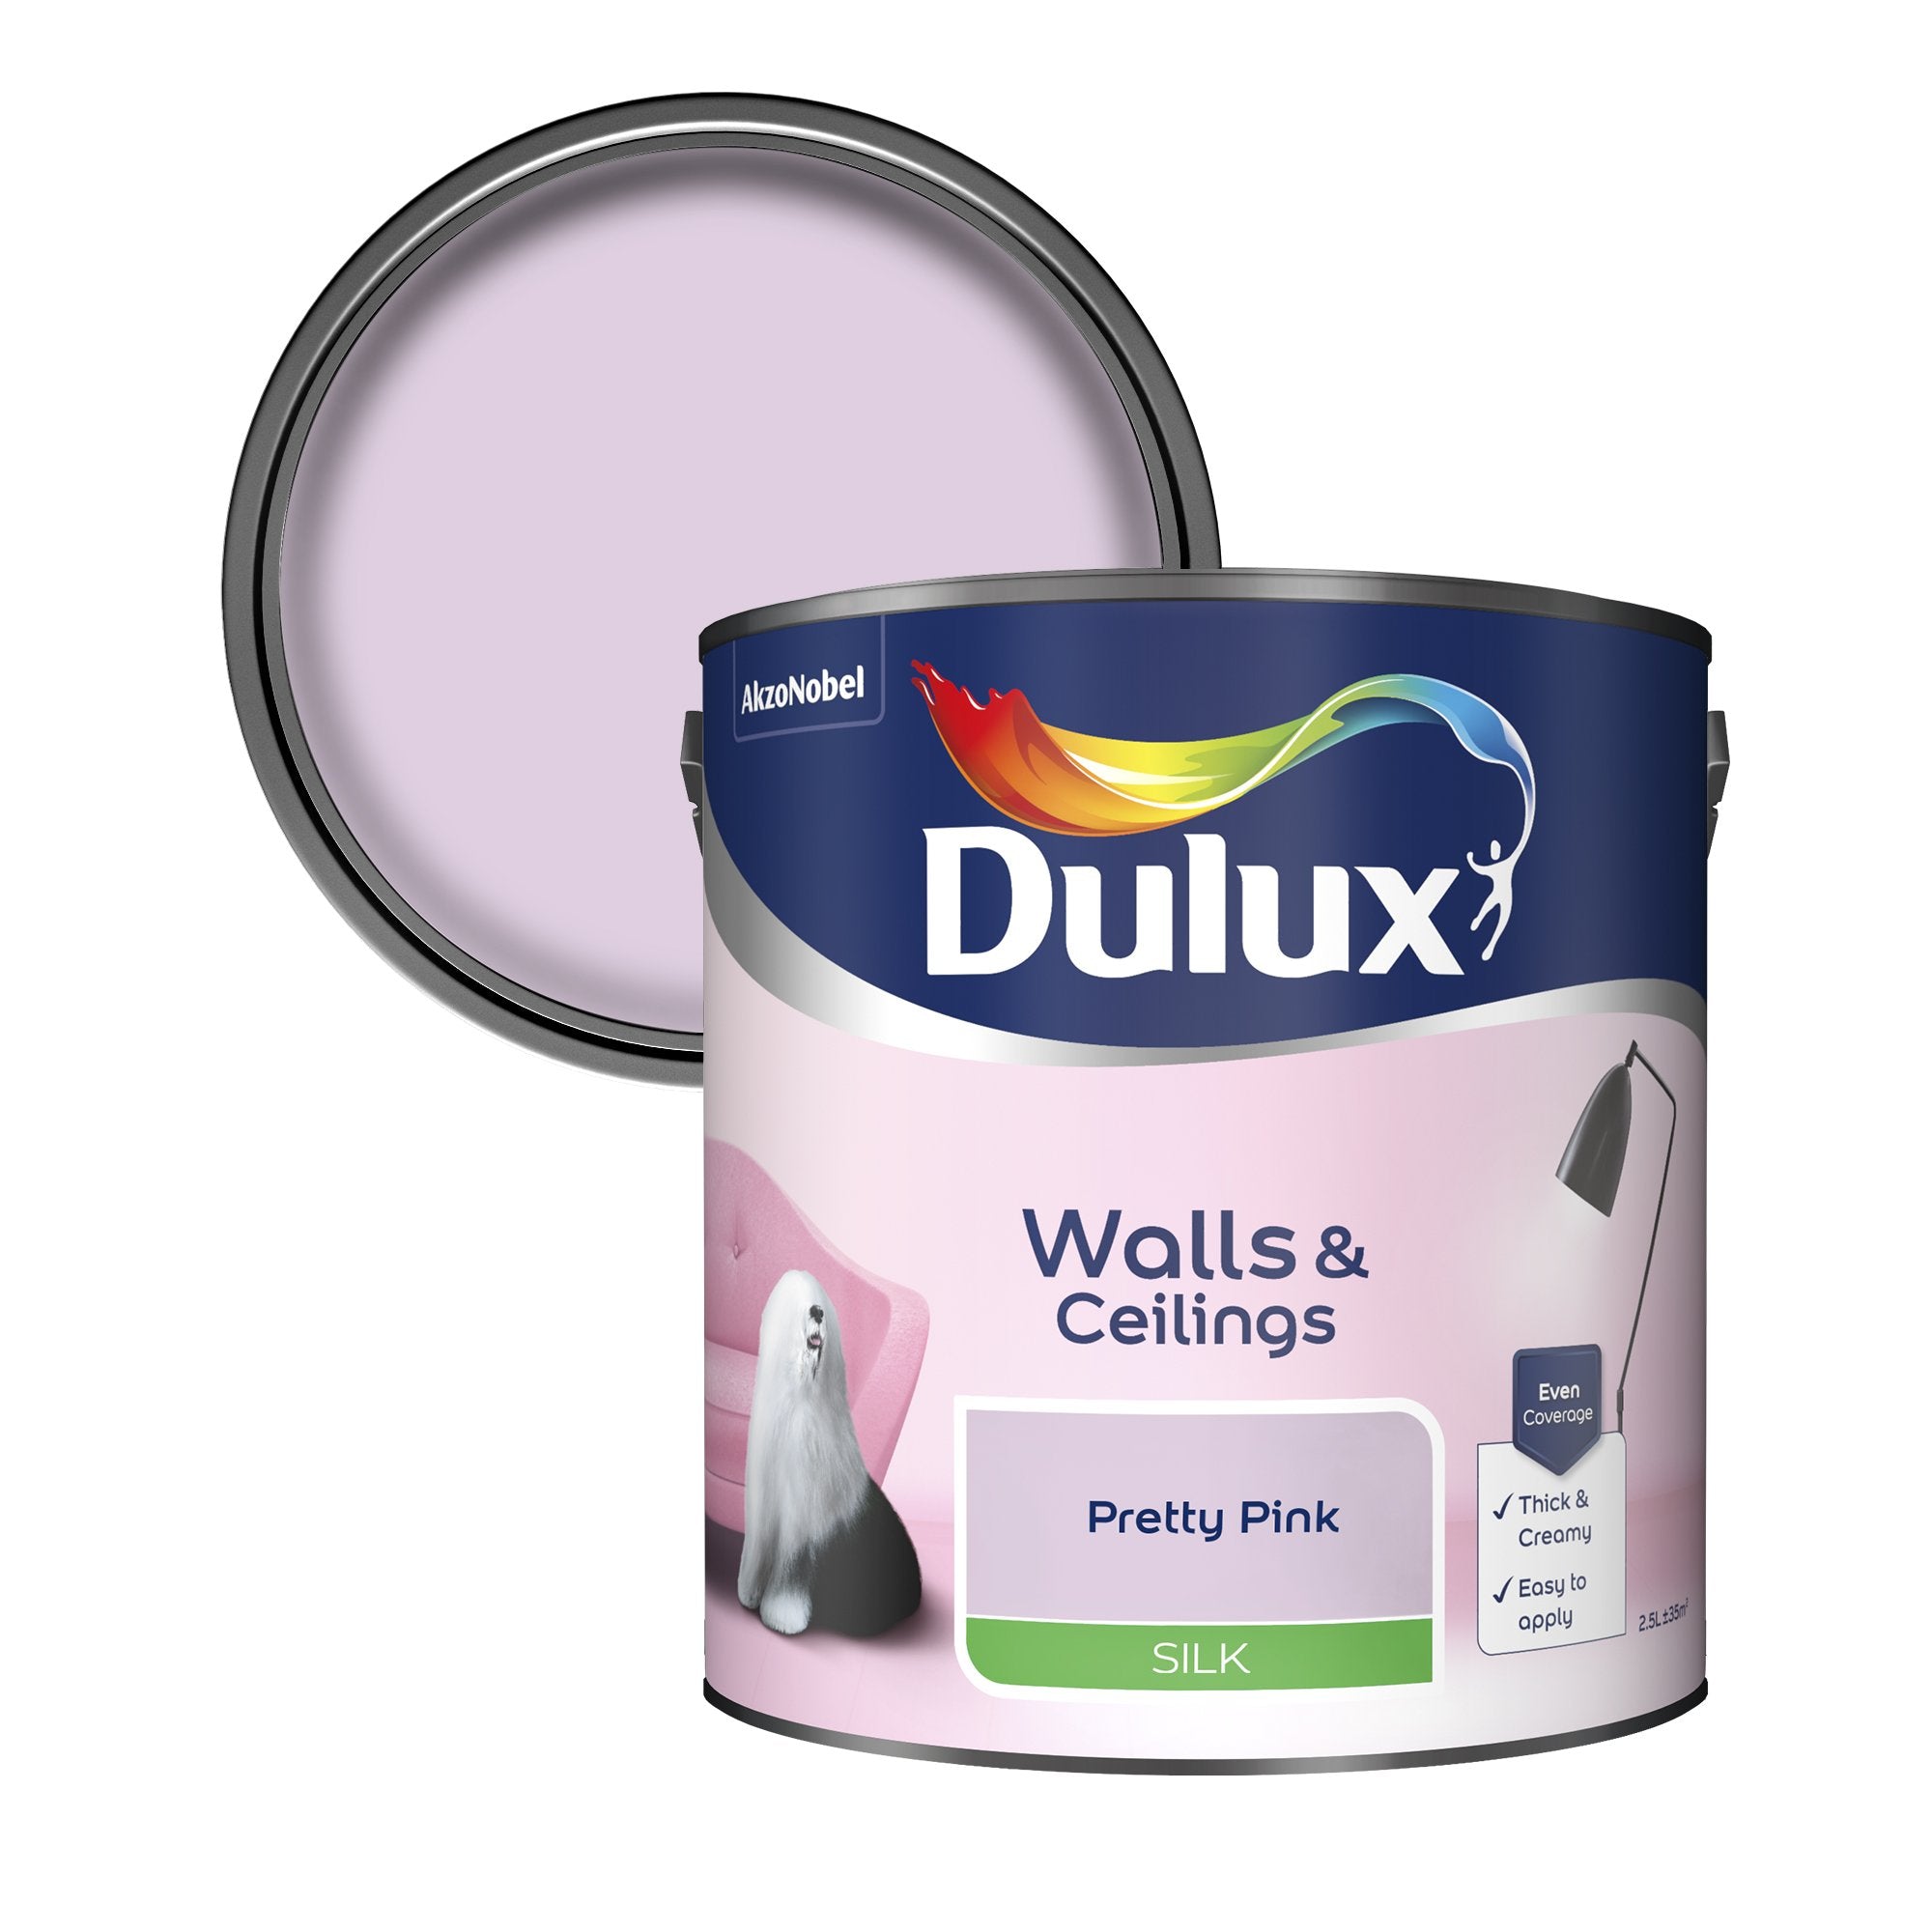 Dulux-Silk-Emulsion-Paint-For-Walls-And-Ceilings-Pretty-Pink-2.5L